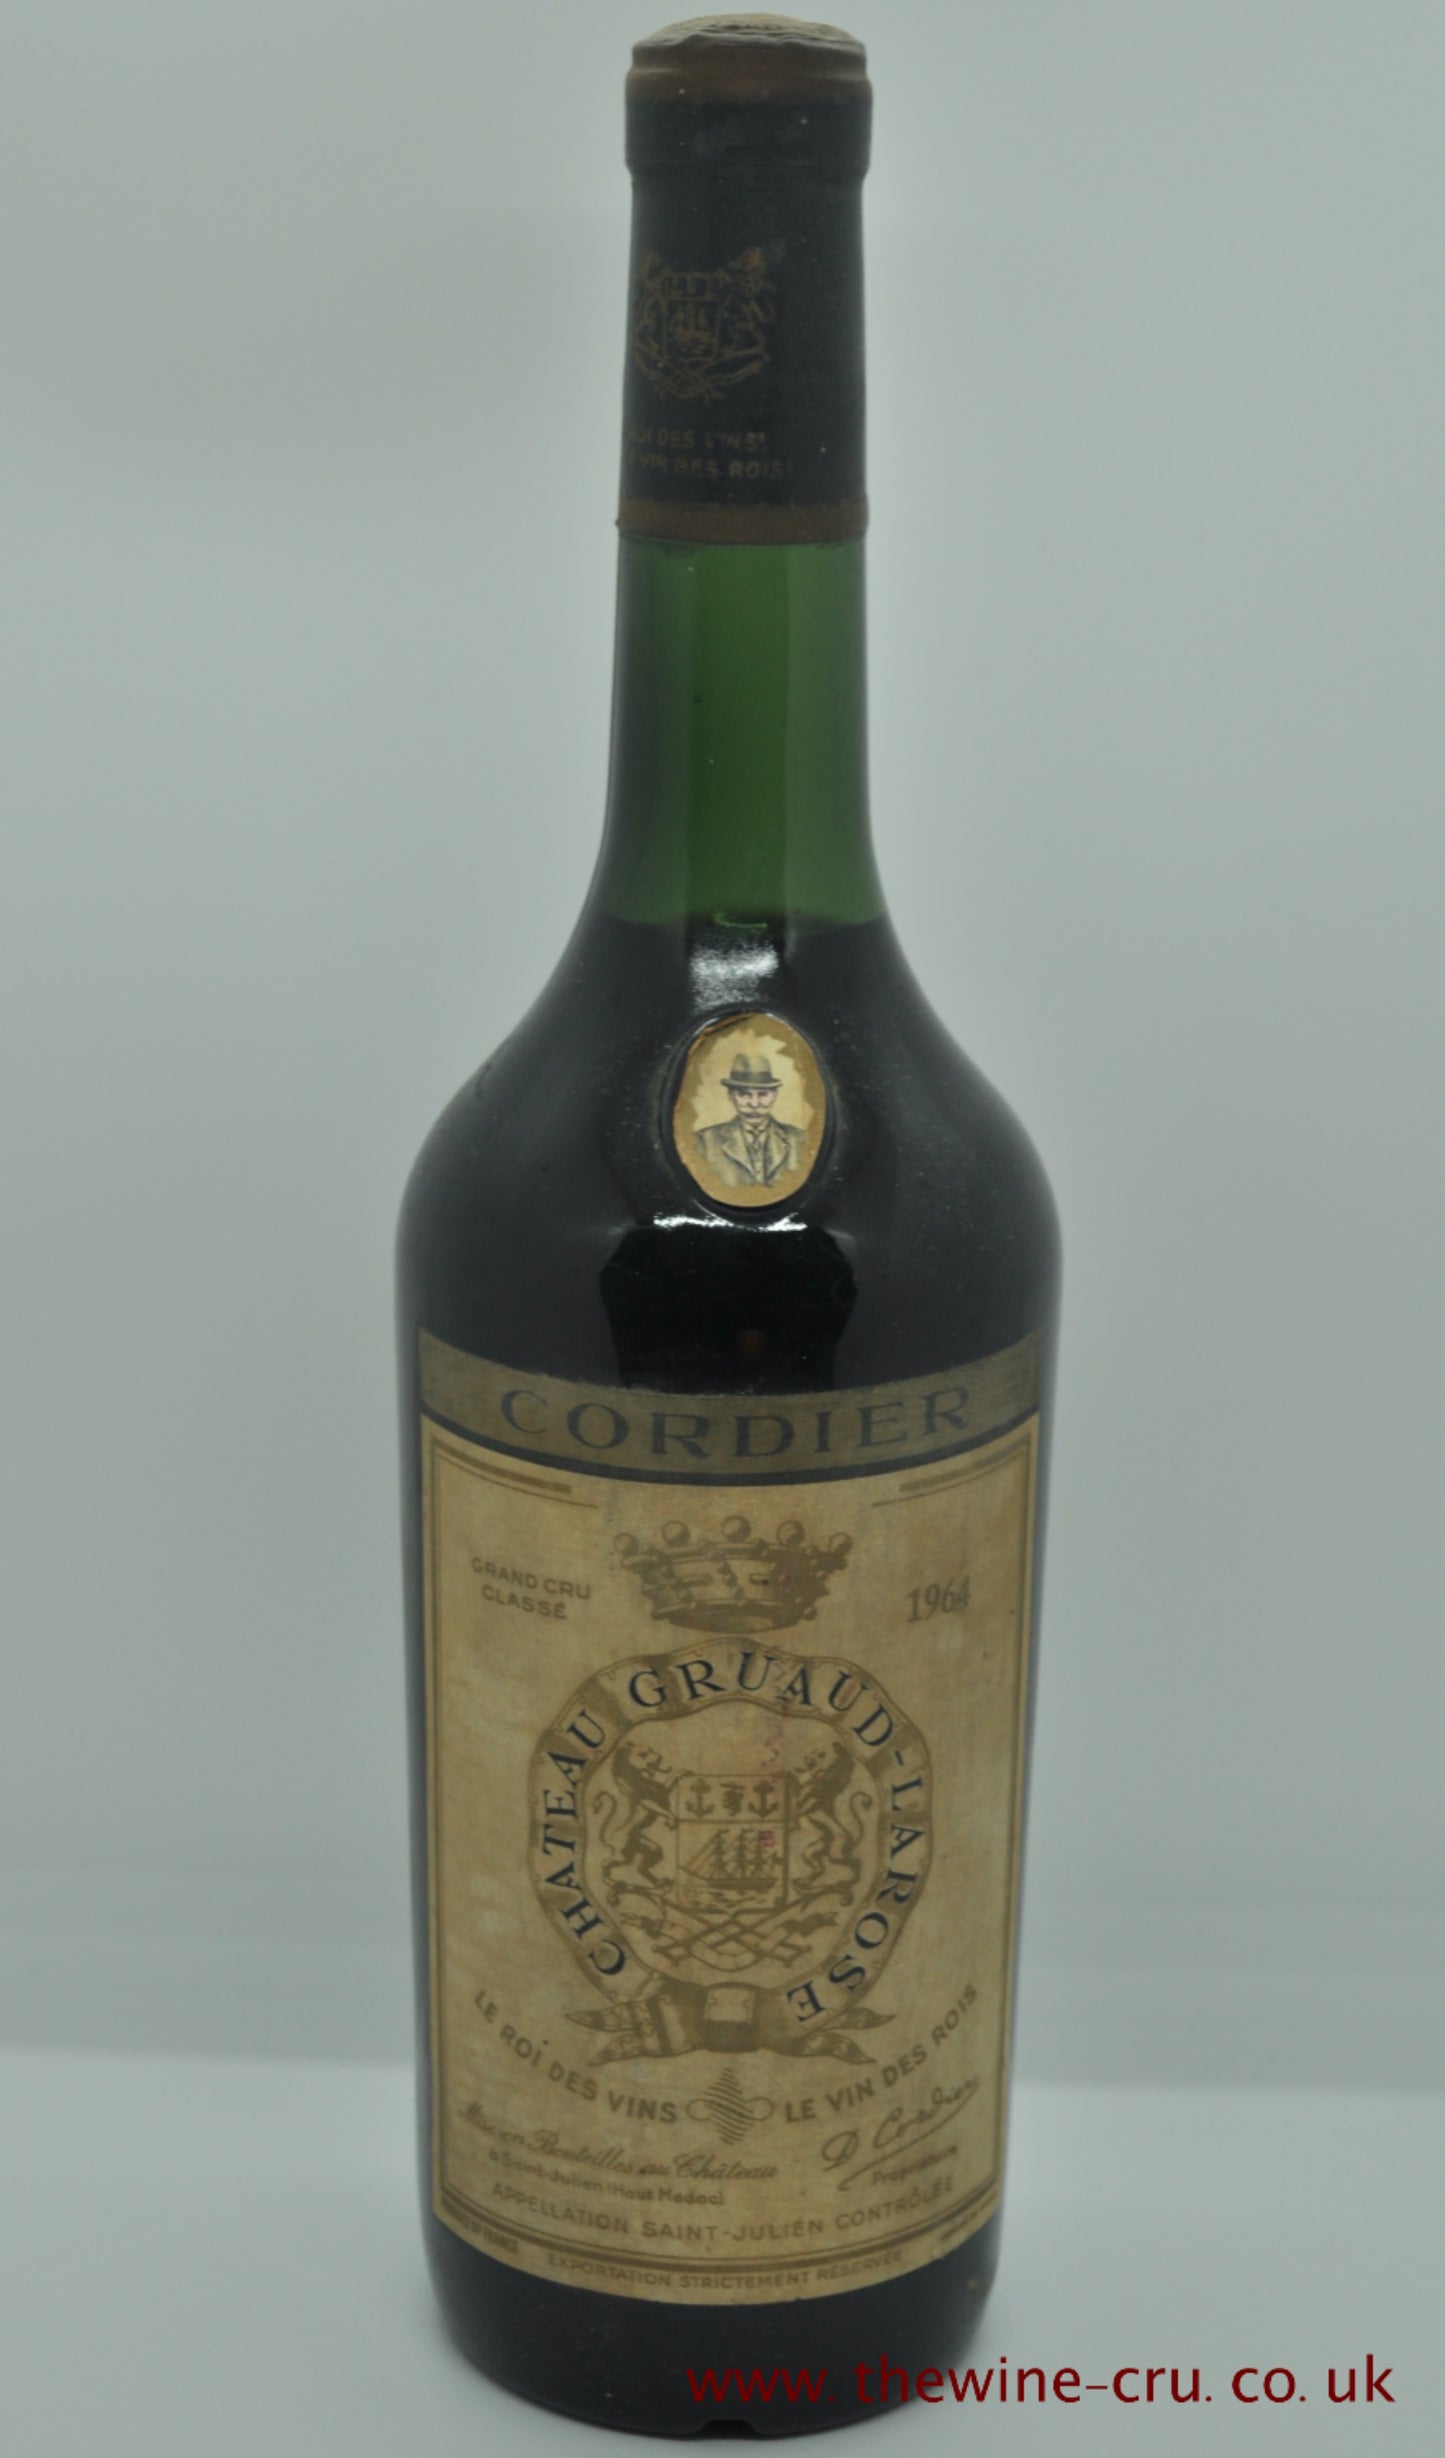 1964 vintage red wine. Chateau Gruaud Larose 1964. France Bordeaux. Immediate delivery UK. Free local delivery.